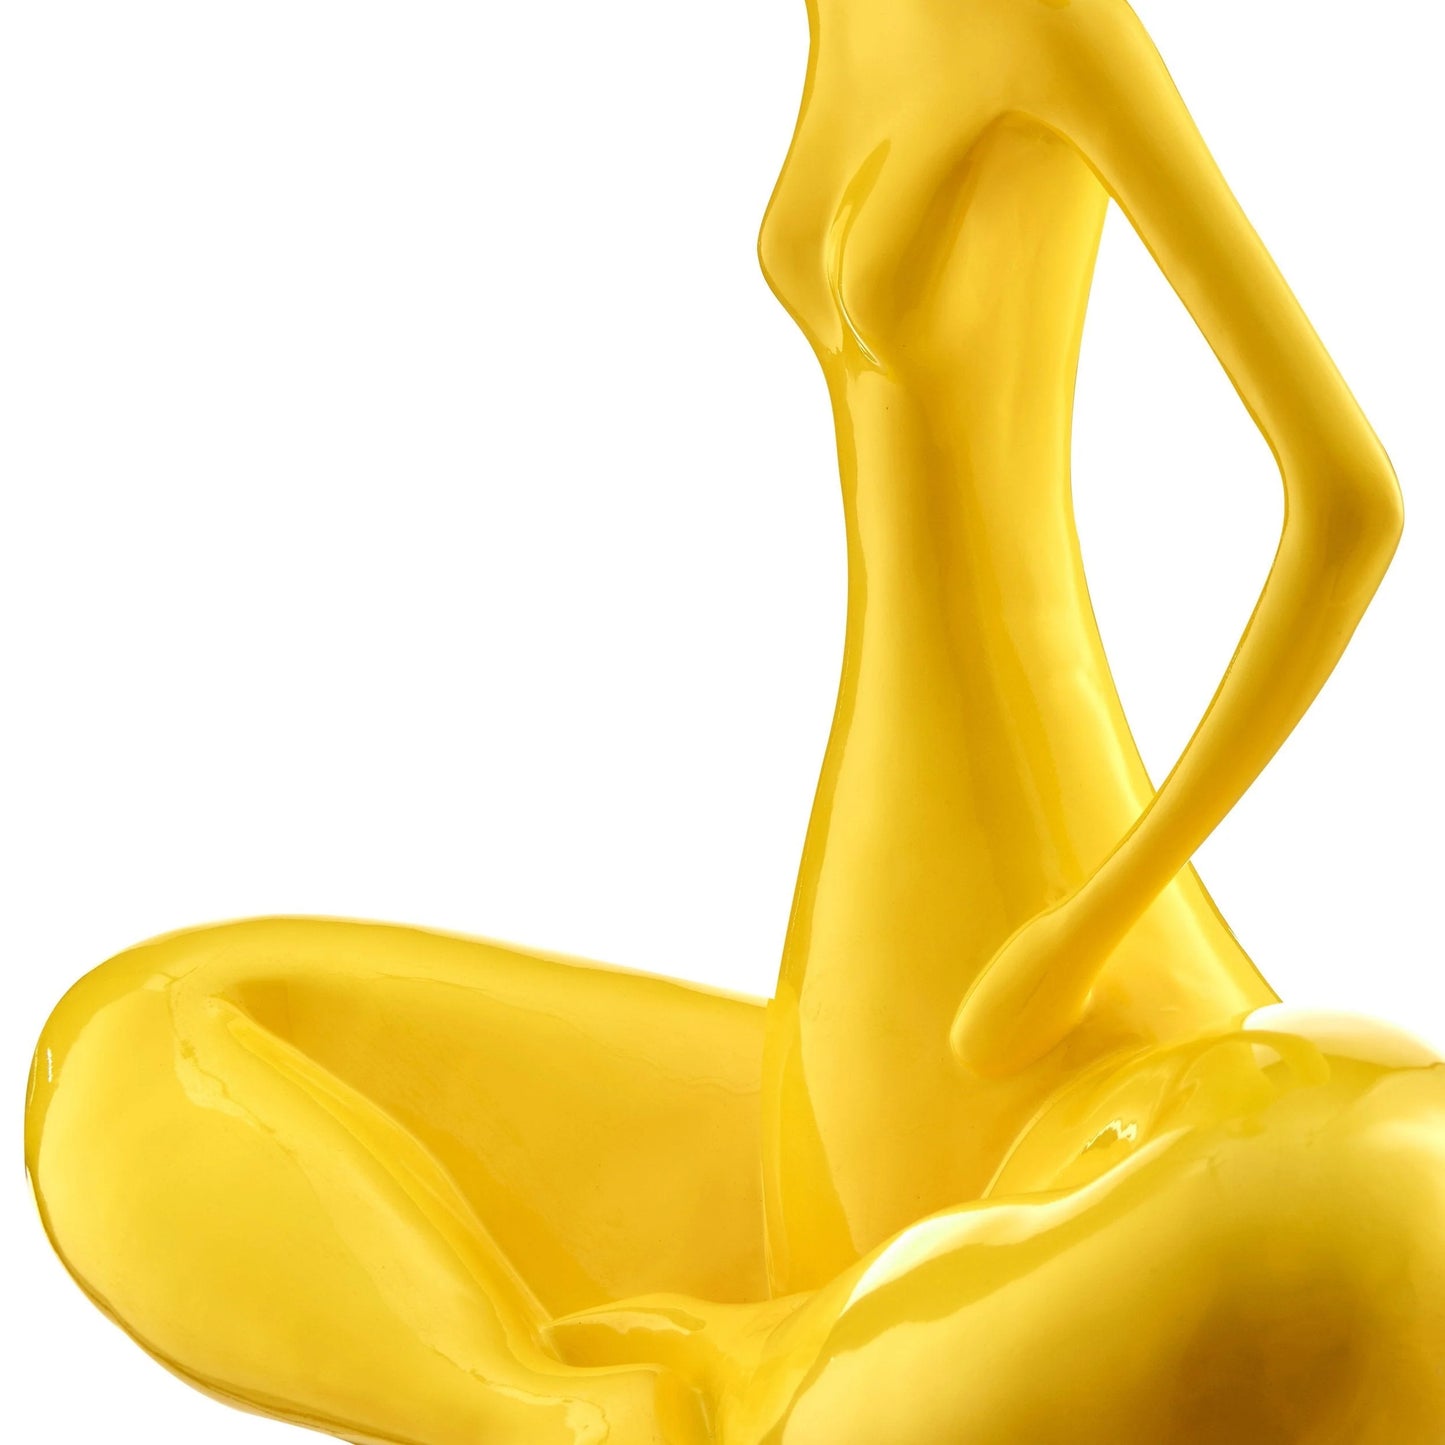 Finesse Decor Modern Diana Sculpture in Glossy Yellow - Large 4